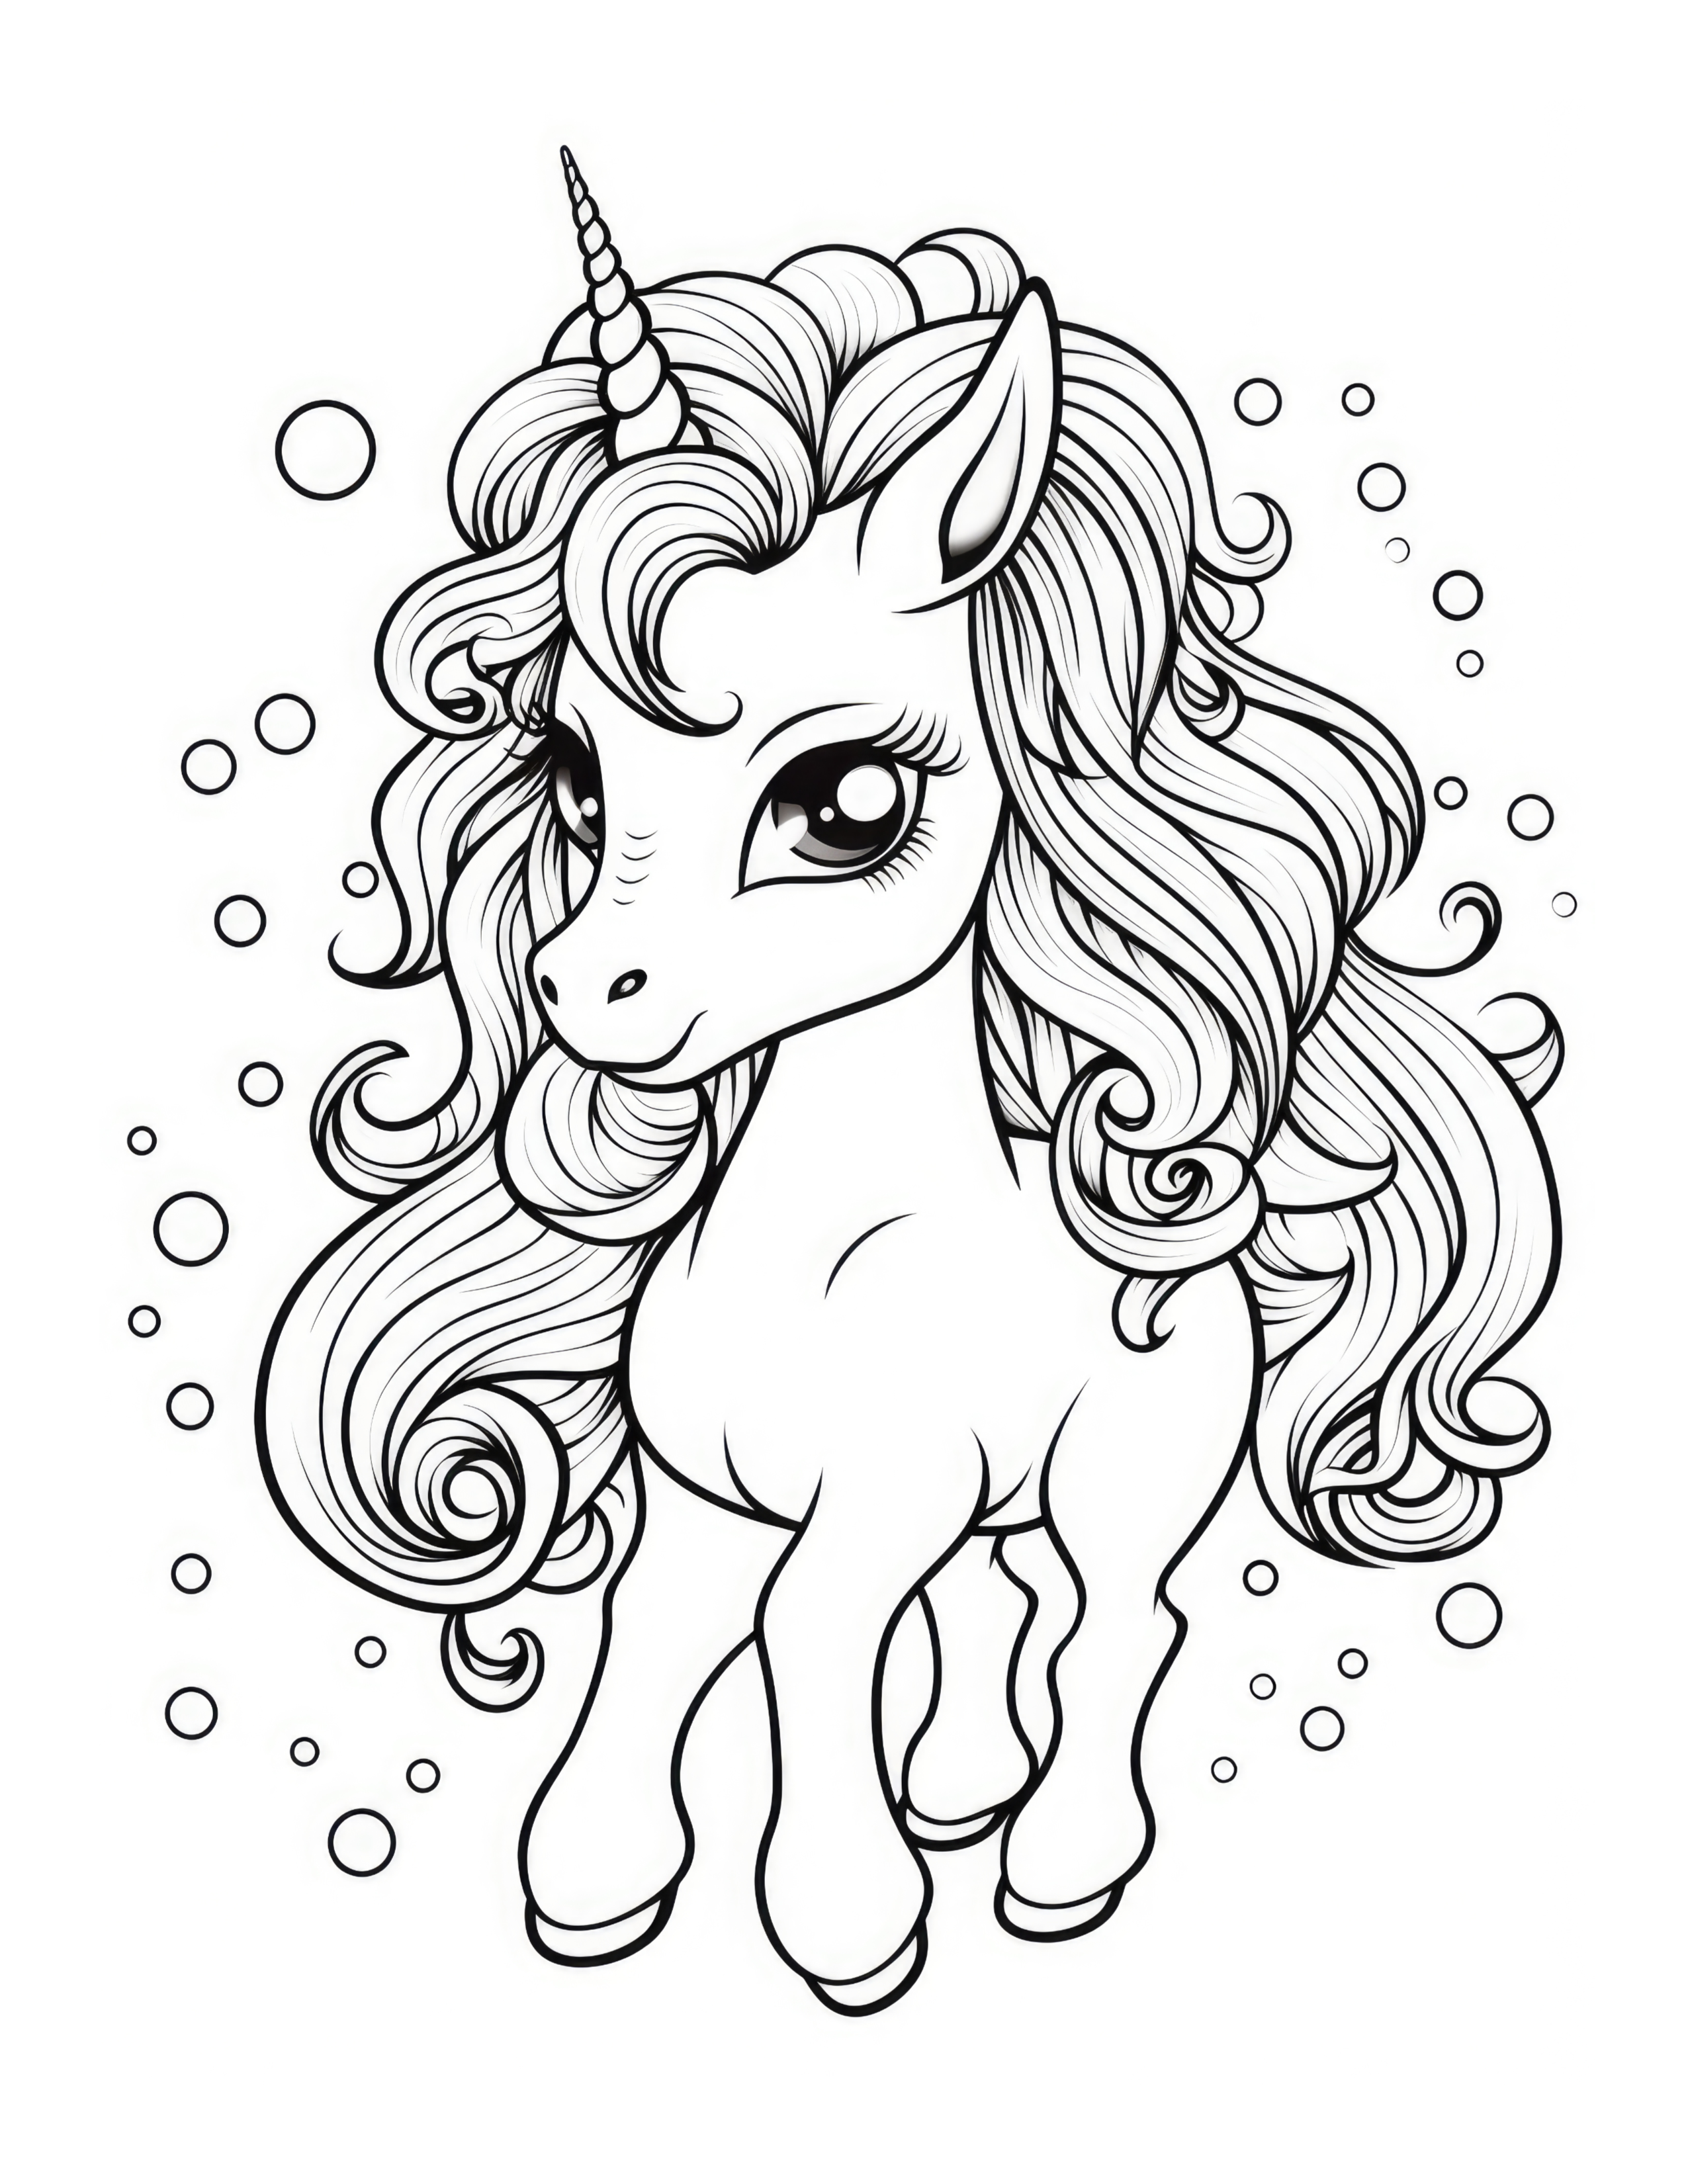 Whimsy Unicorn Coloring Page